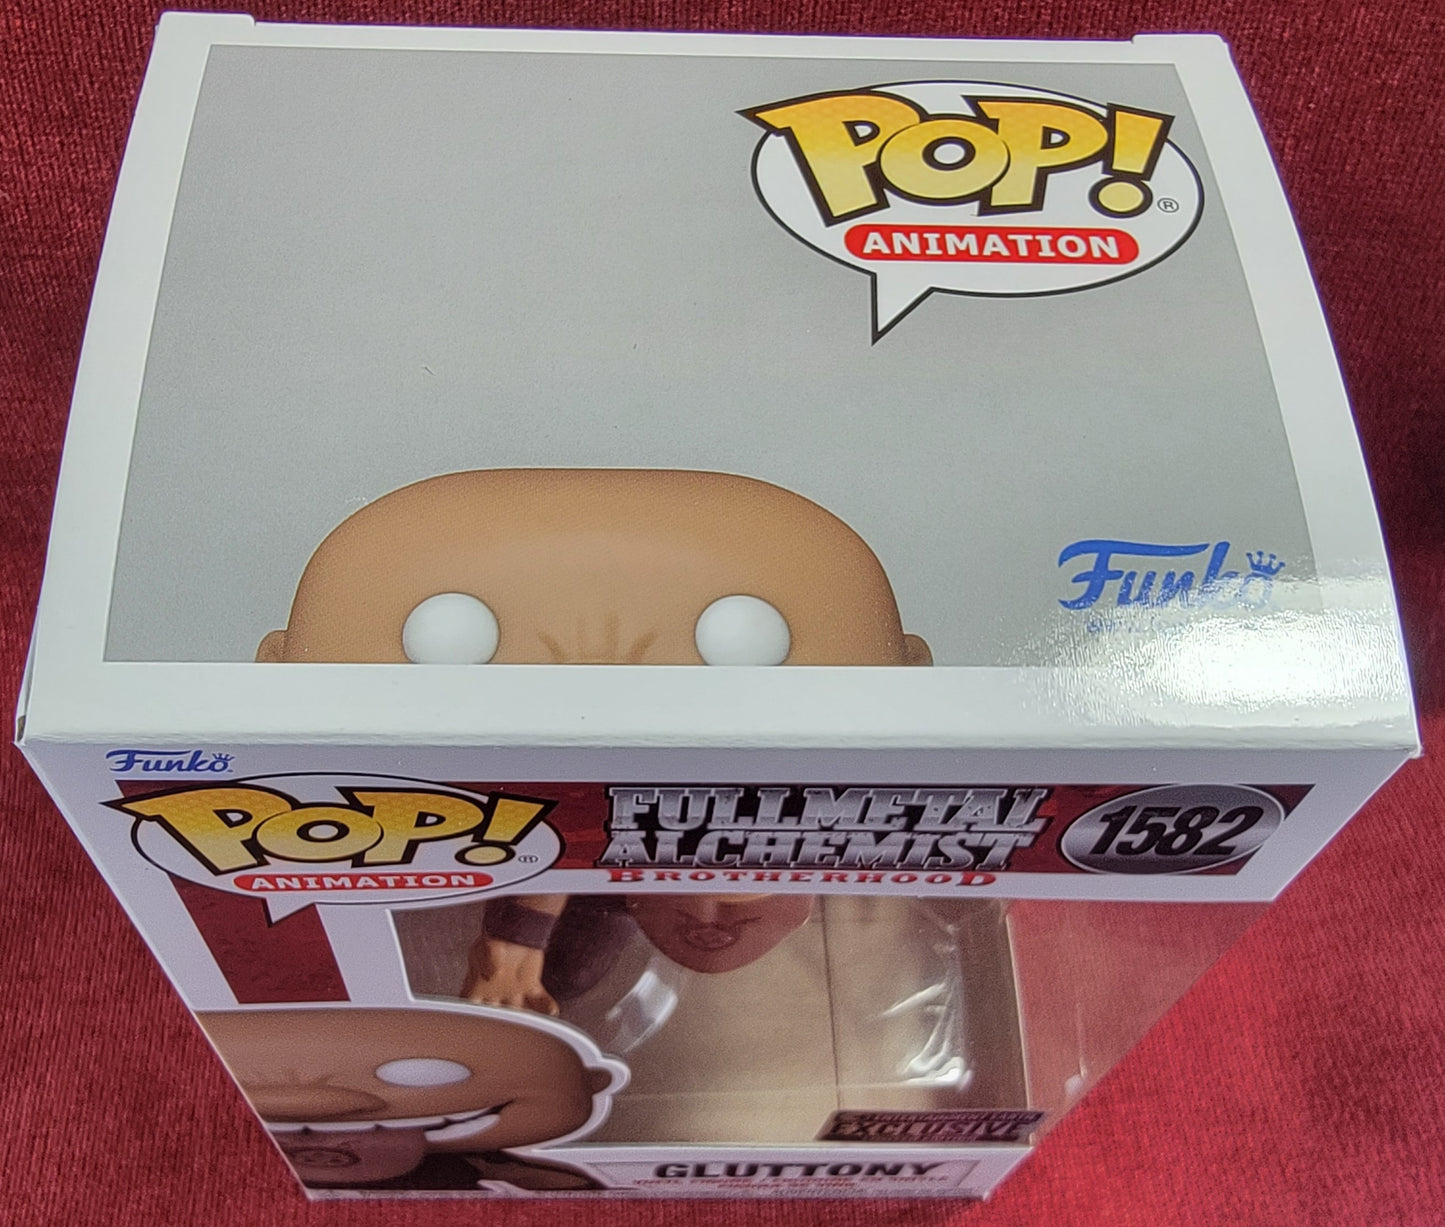 Gluttony entertainment earth exclusive funko # 1582 (nib)
With pop protector